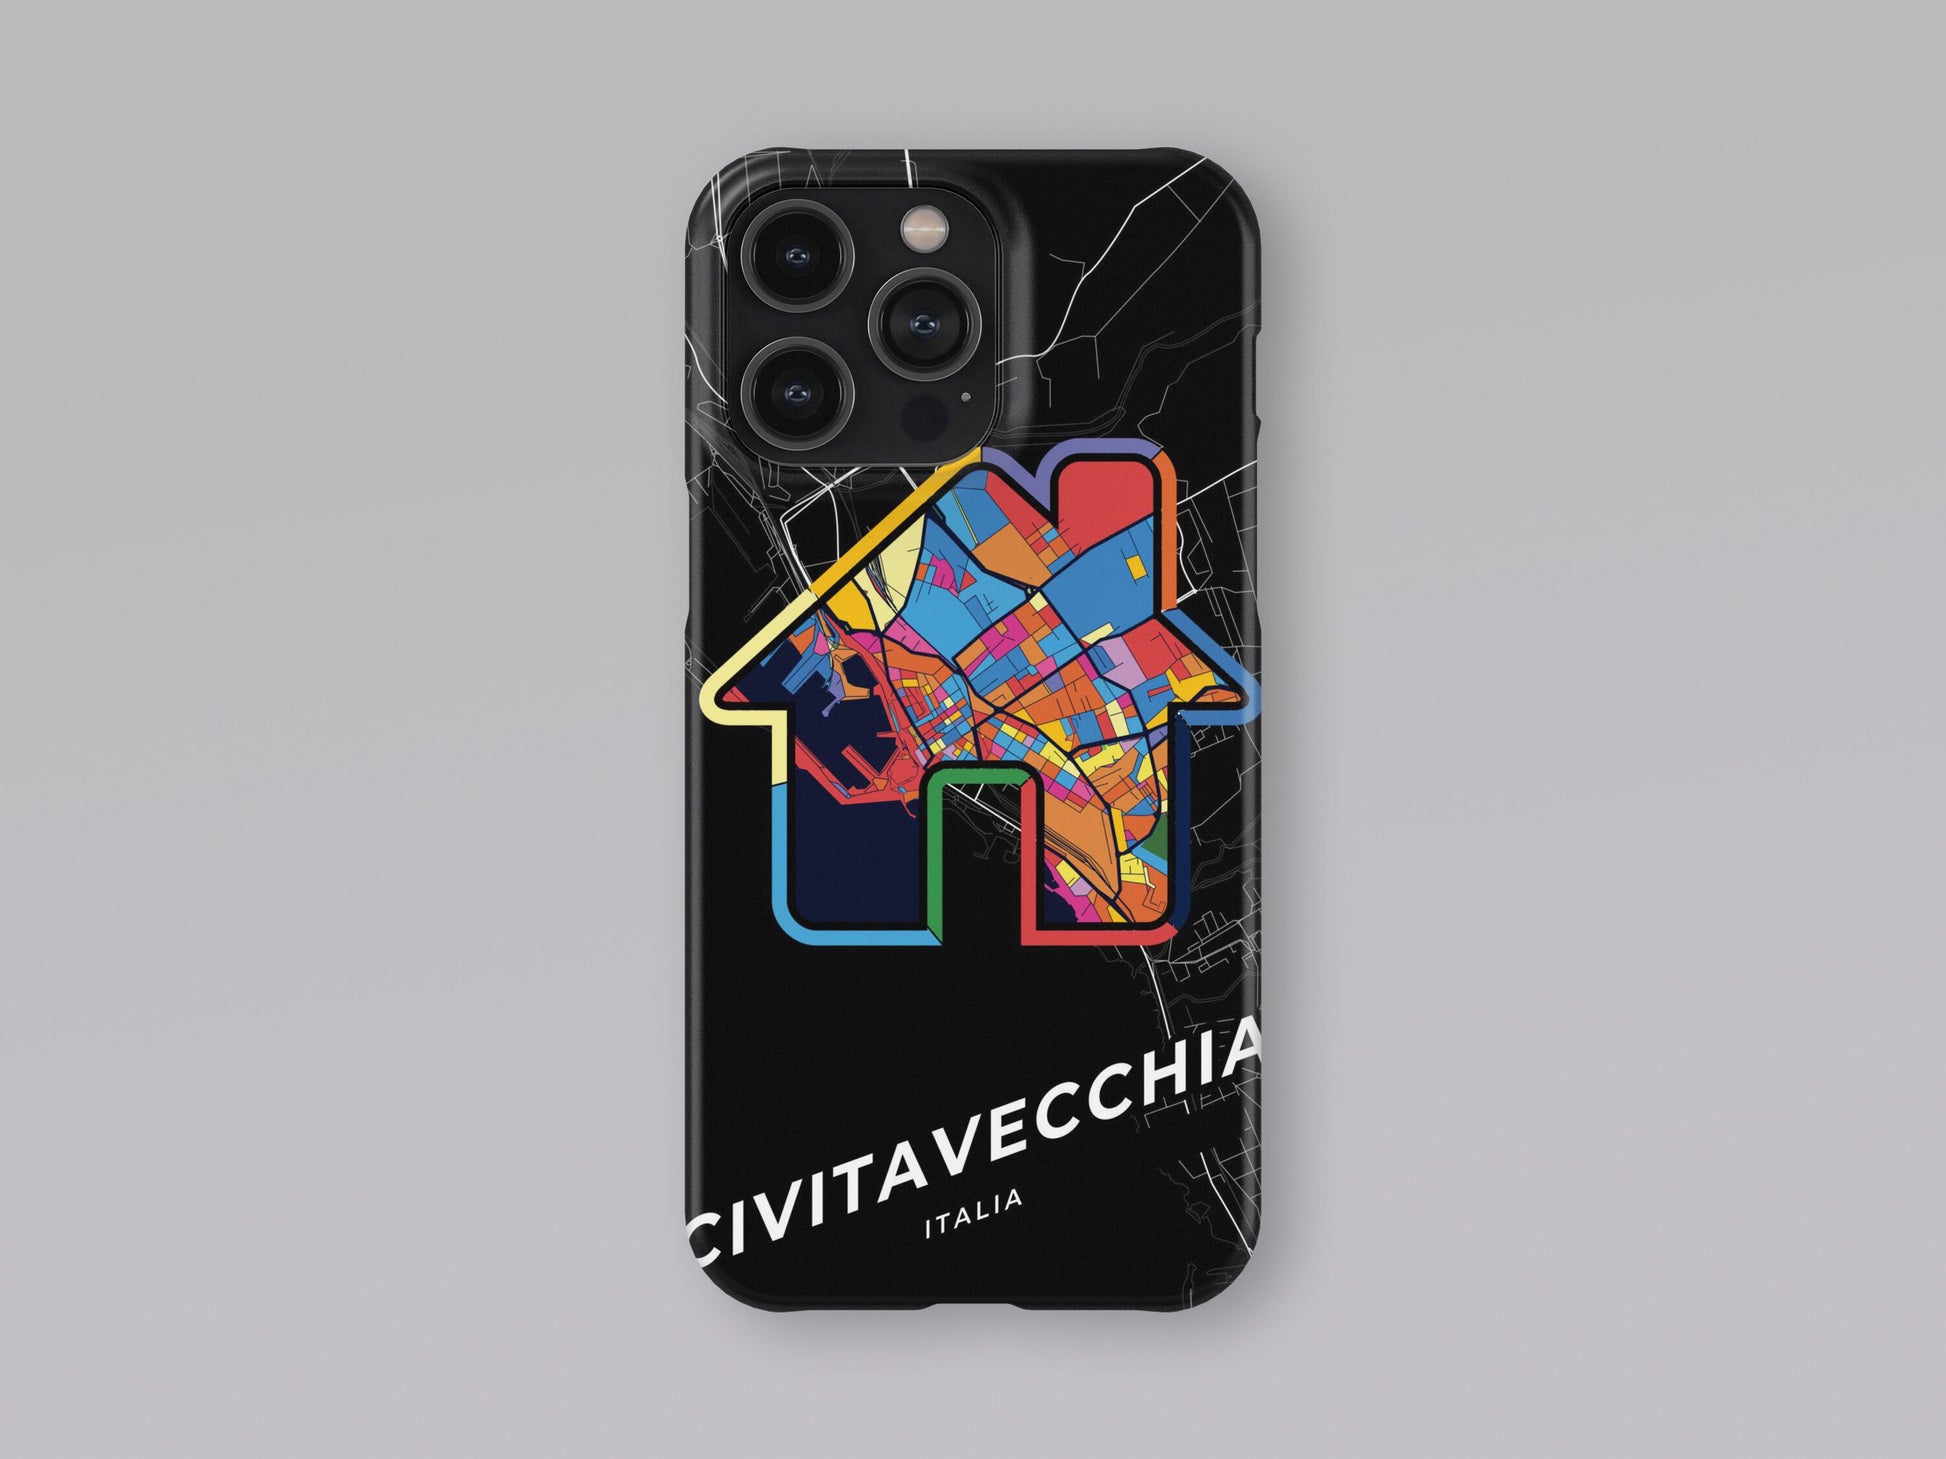 Civitavecchia Italy slim phone case with colorful icon. Birthday, wedding or housewarming gift. Couple match cases. 3